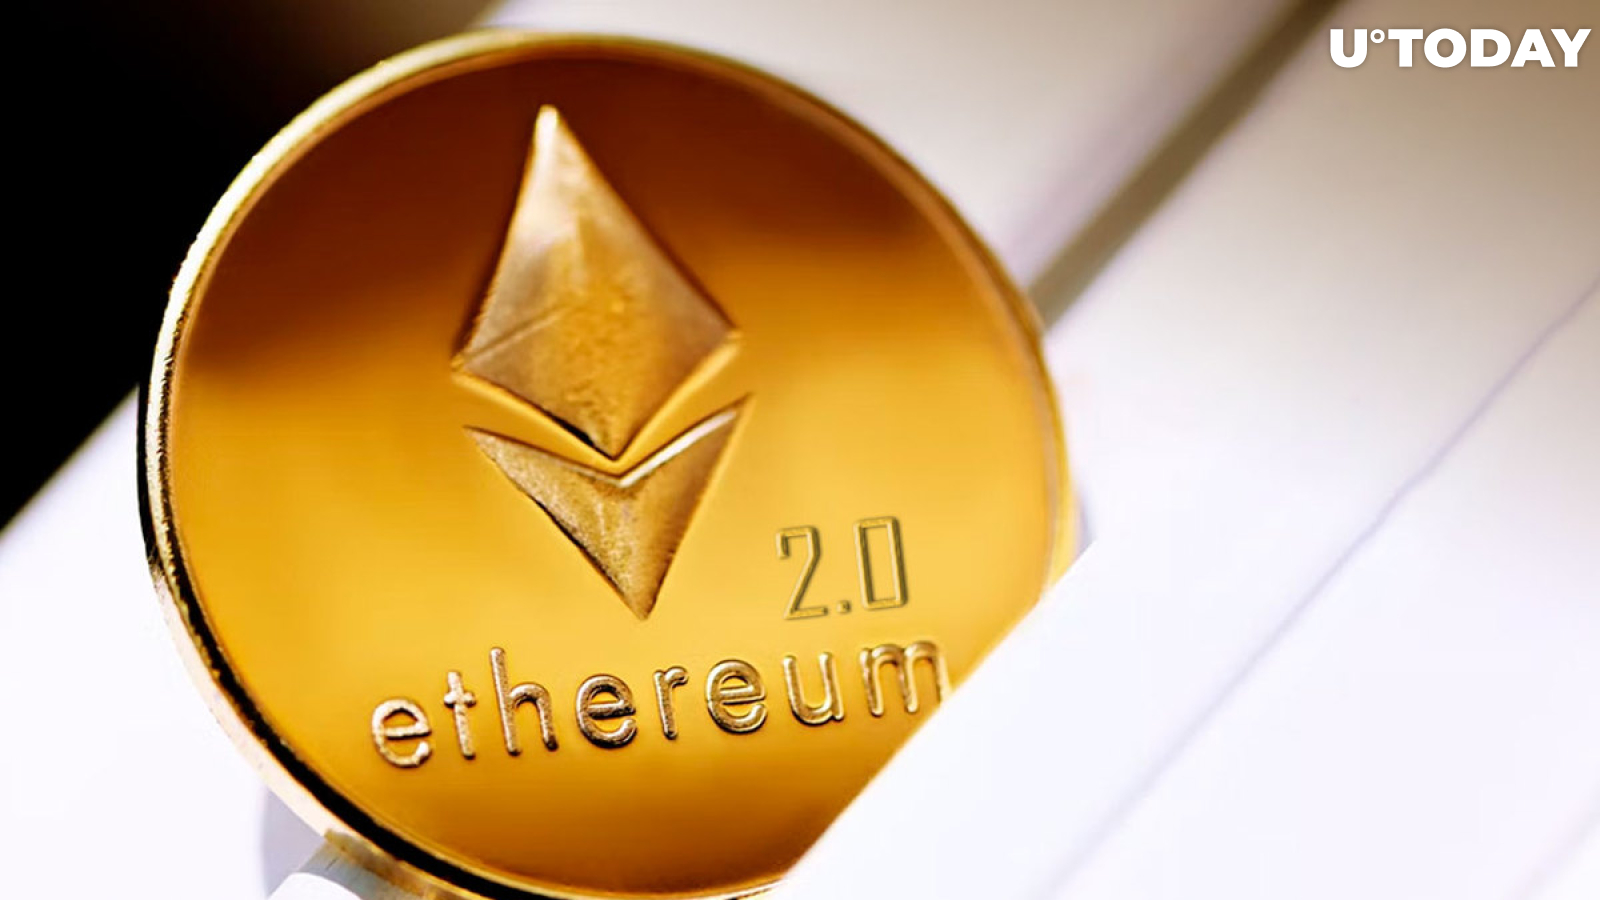 10.9% of Ethereum Supply Now Deposited in ETH 2.0